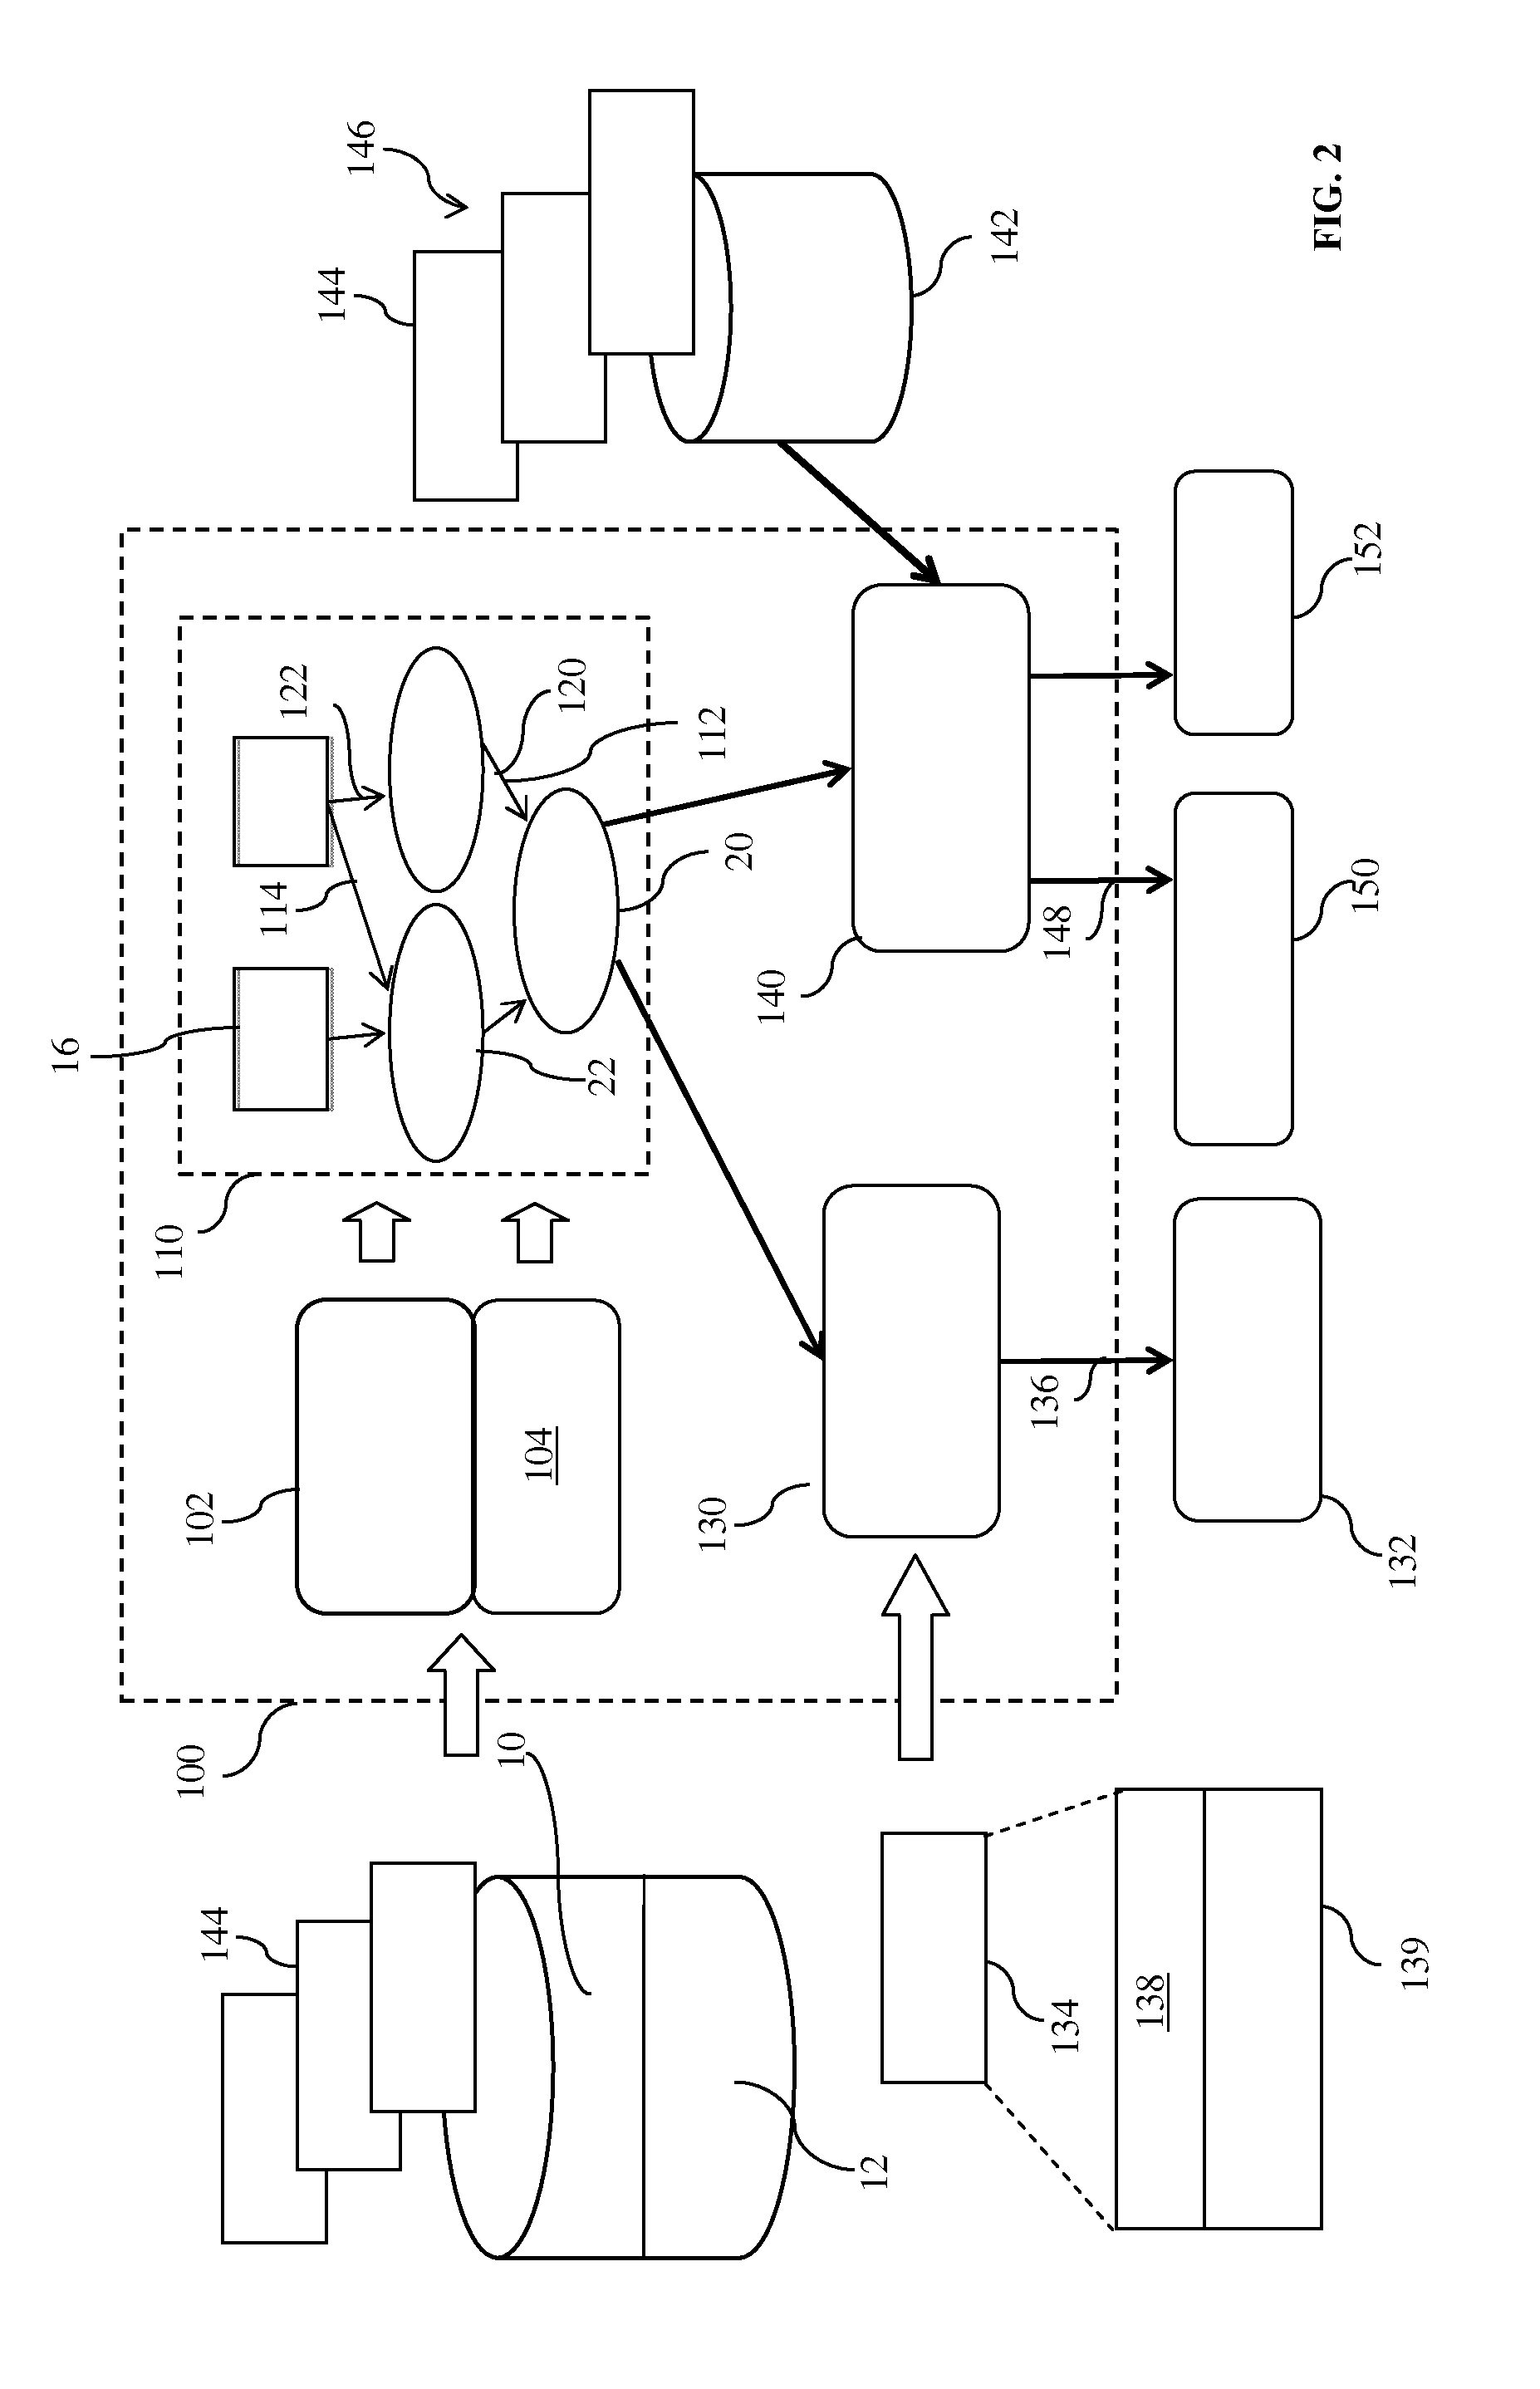 Method and system for root cause analysis and quality monitoring of system-level faults